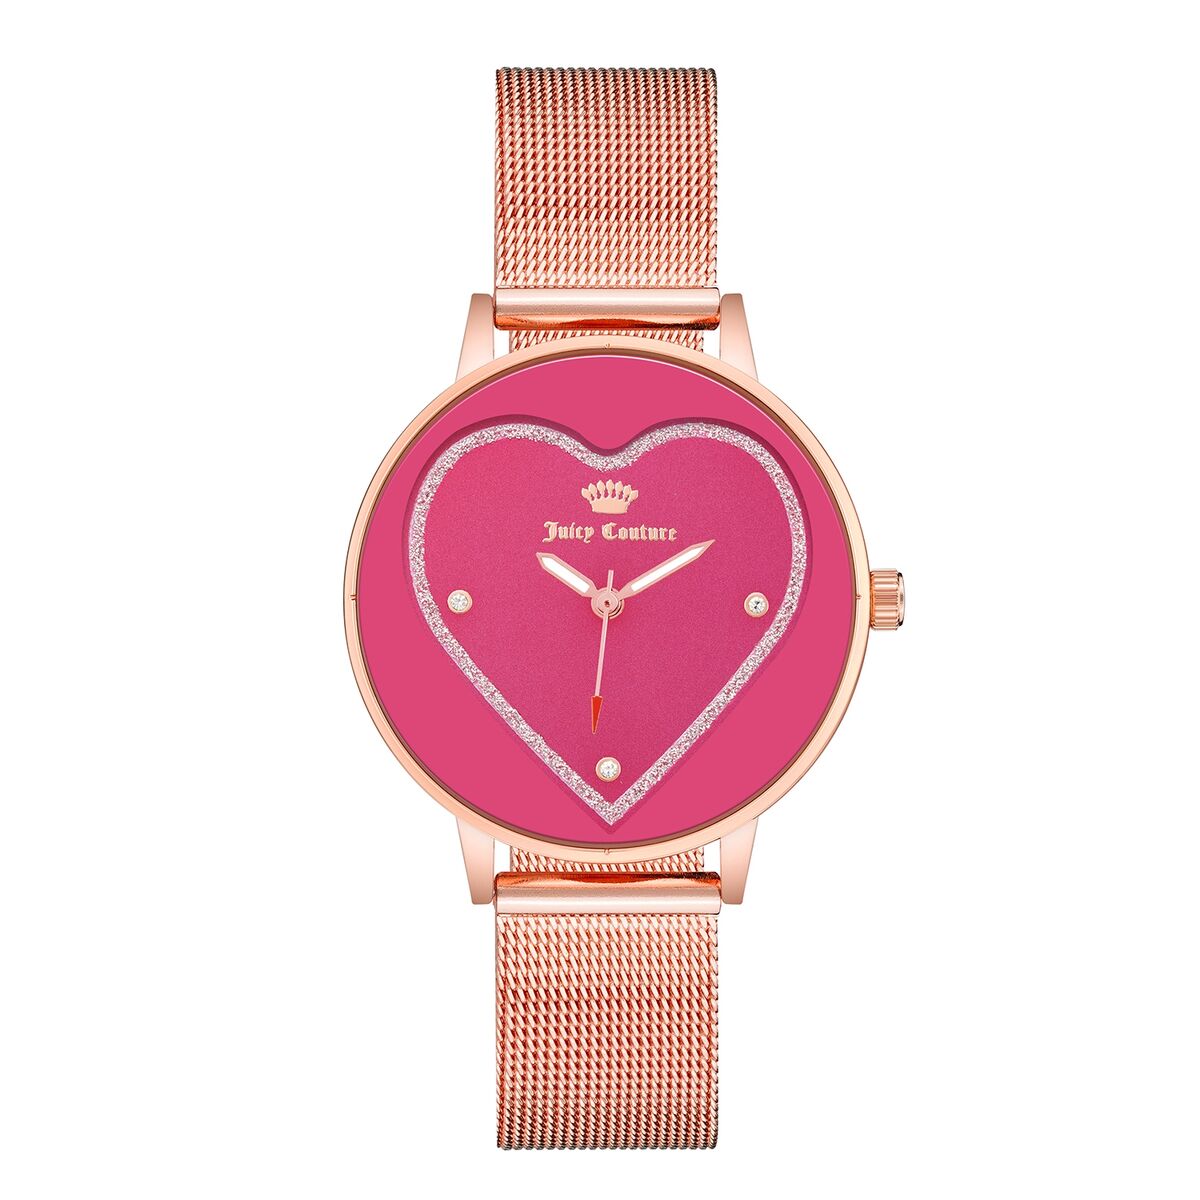 Montre Femme Juicy Couture JC_1240HPRG